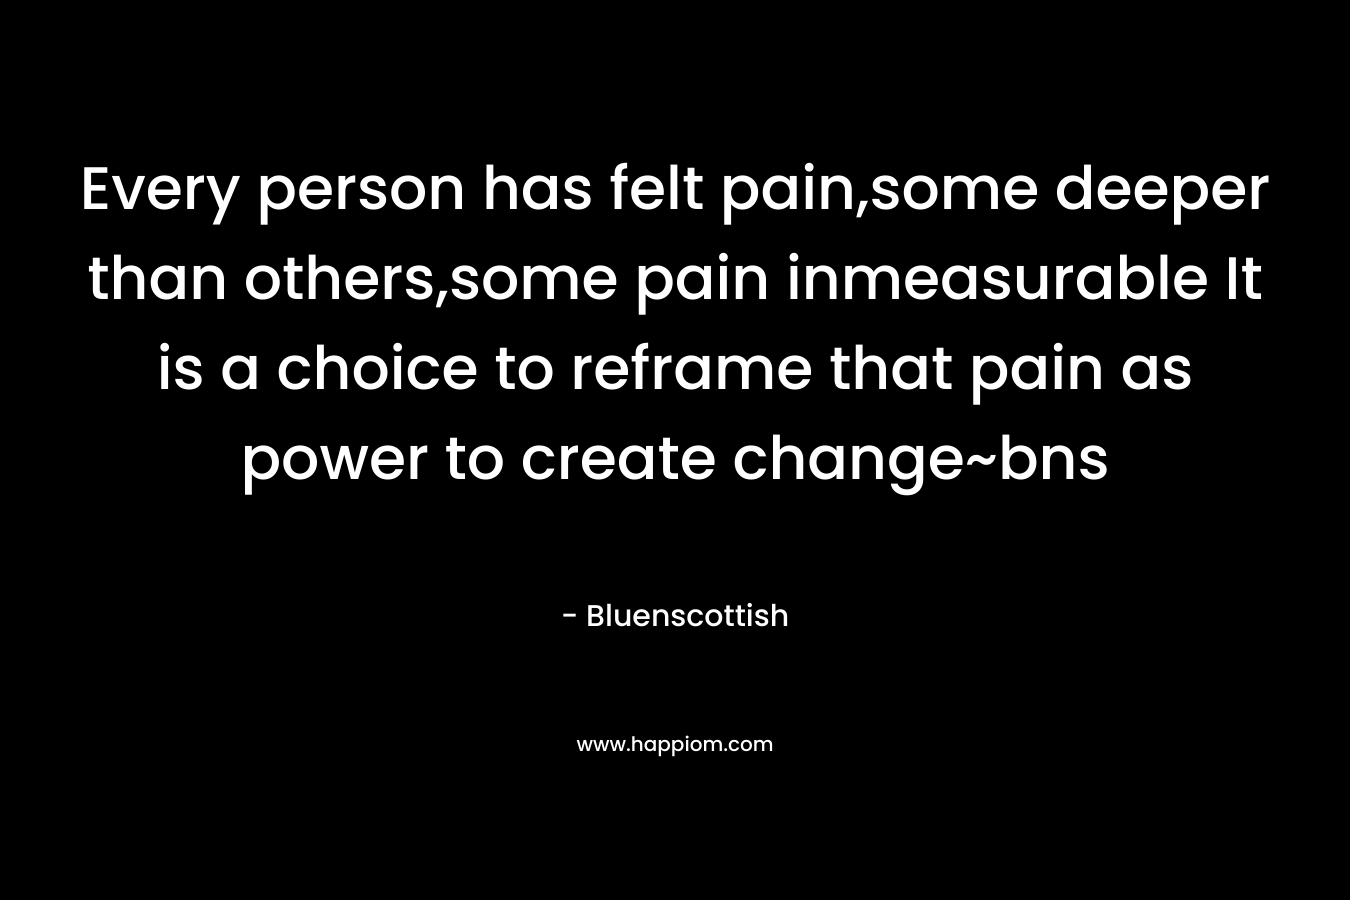 Every person has felt pain,some deeper than others,some pain inmeasurable It is a choice to reframe that pain as power to create change~bns